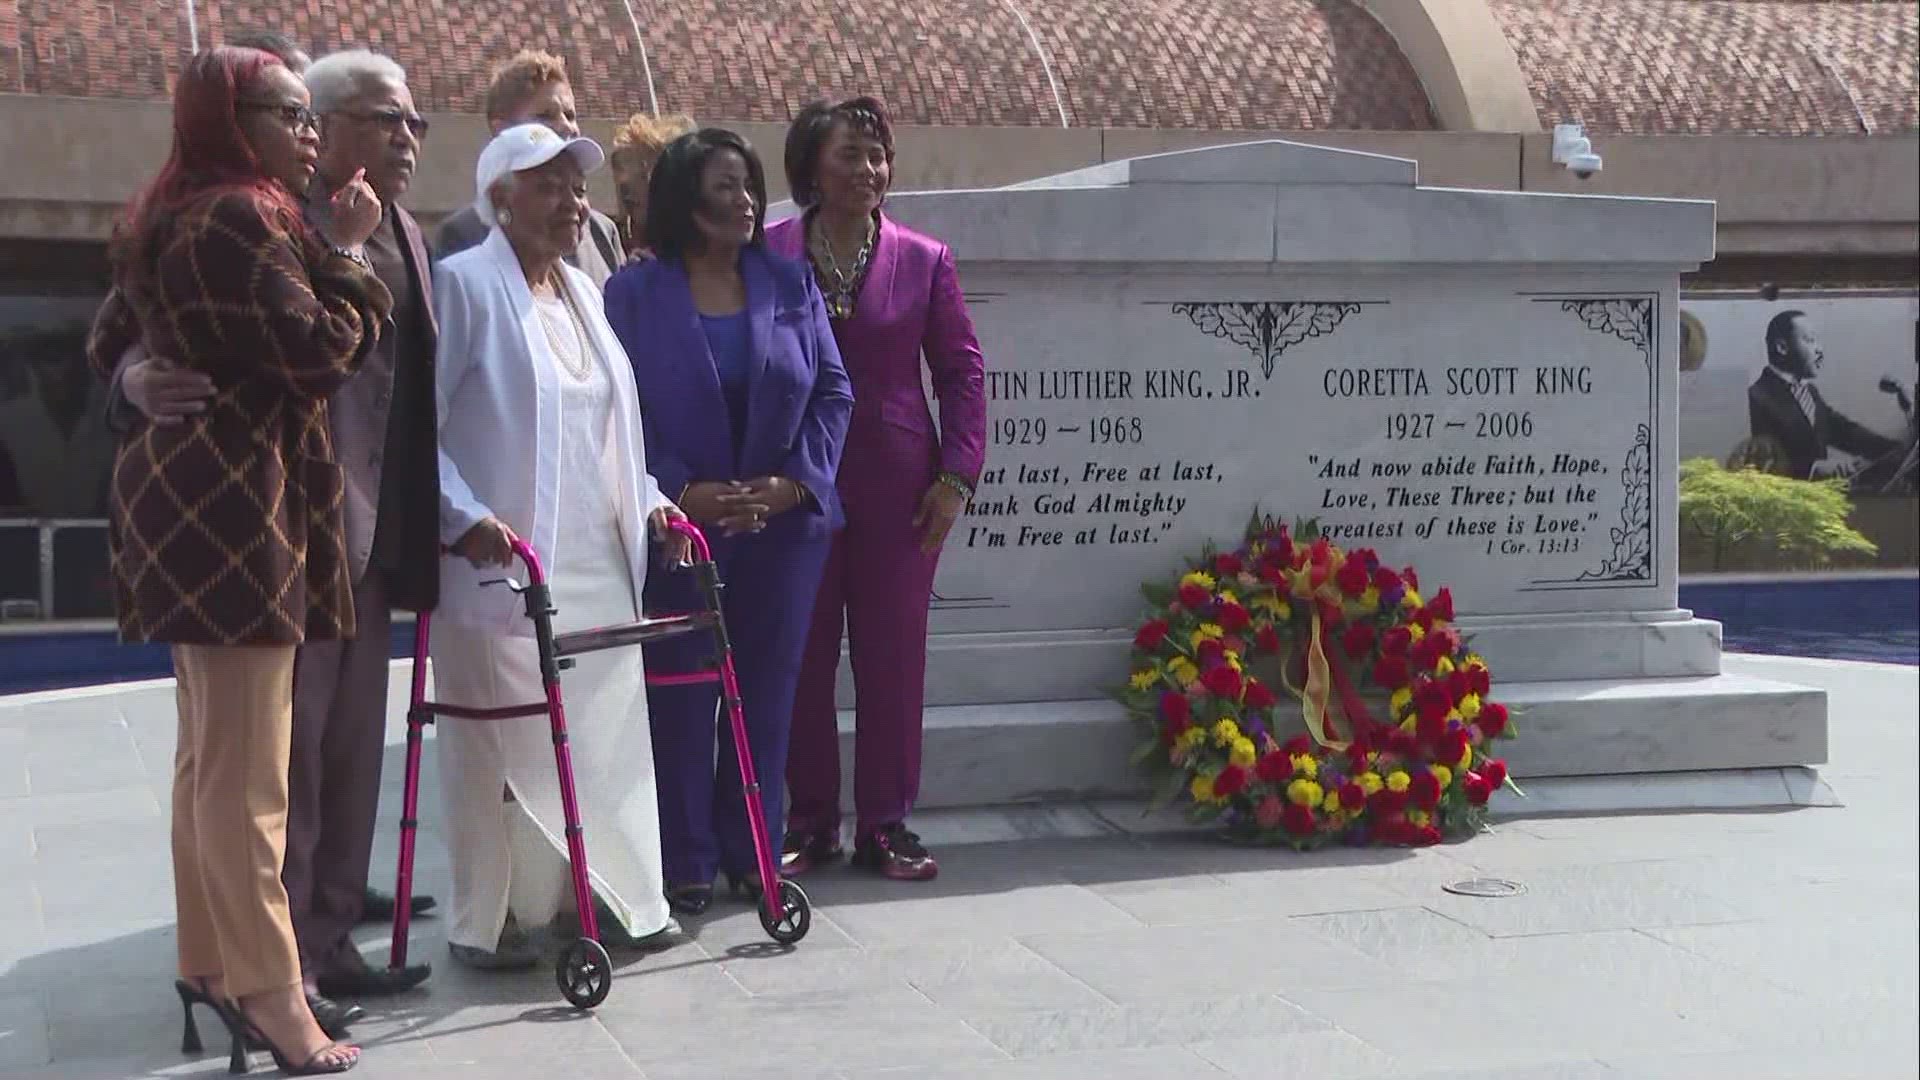 File:Grave-site of Rev. Dr. Martin Luther King Jr. and Coretta